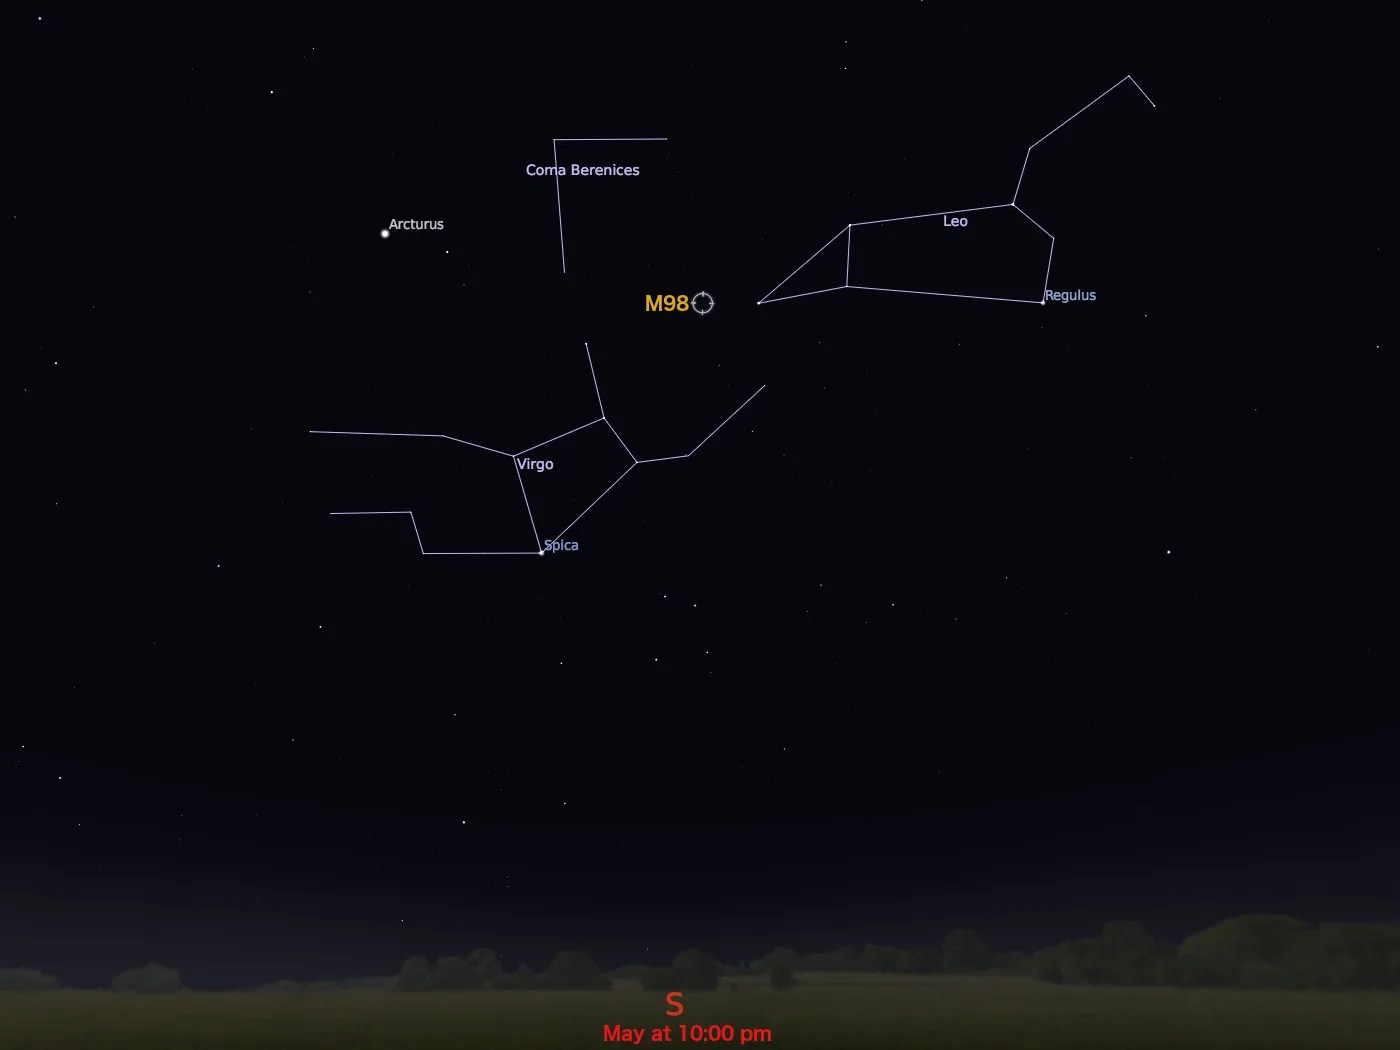 star chart showing location in night sky of M98